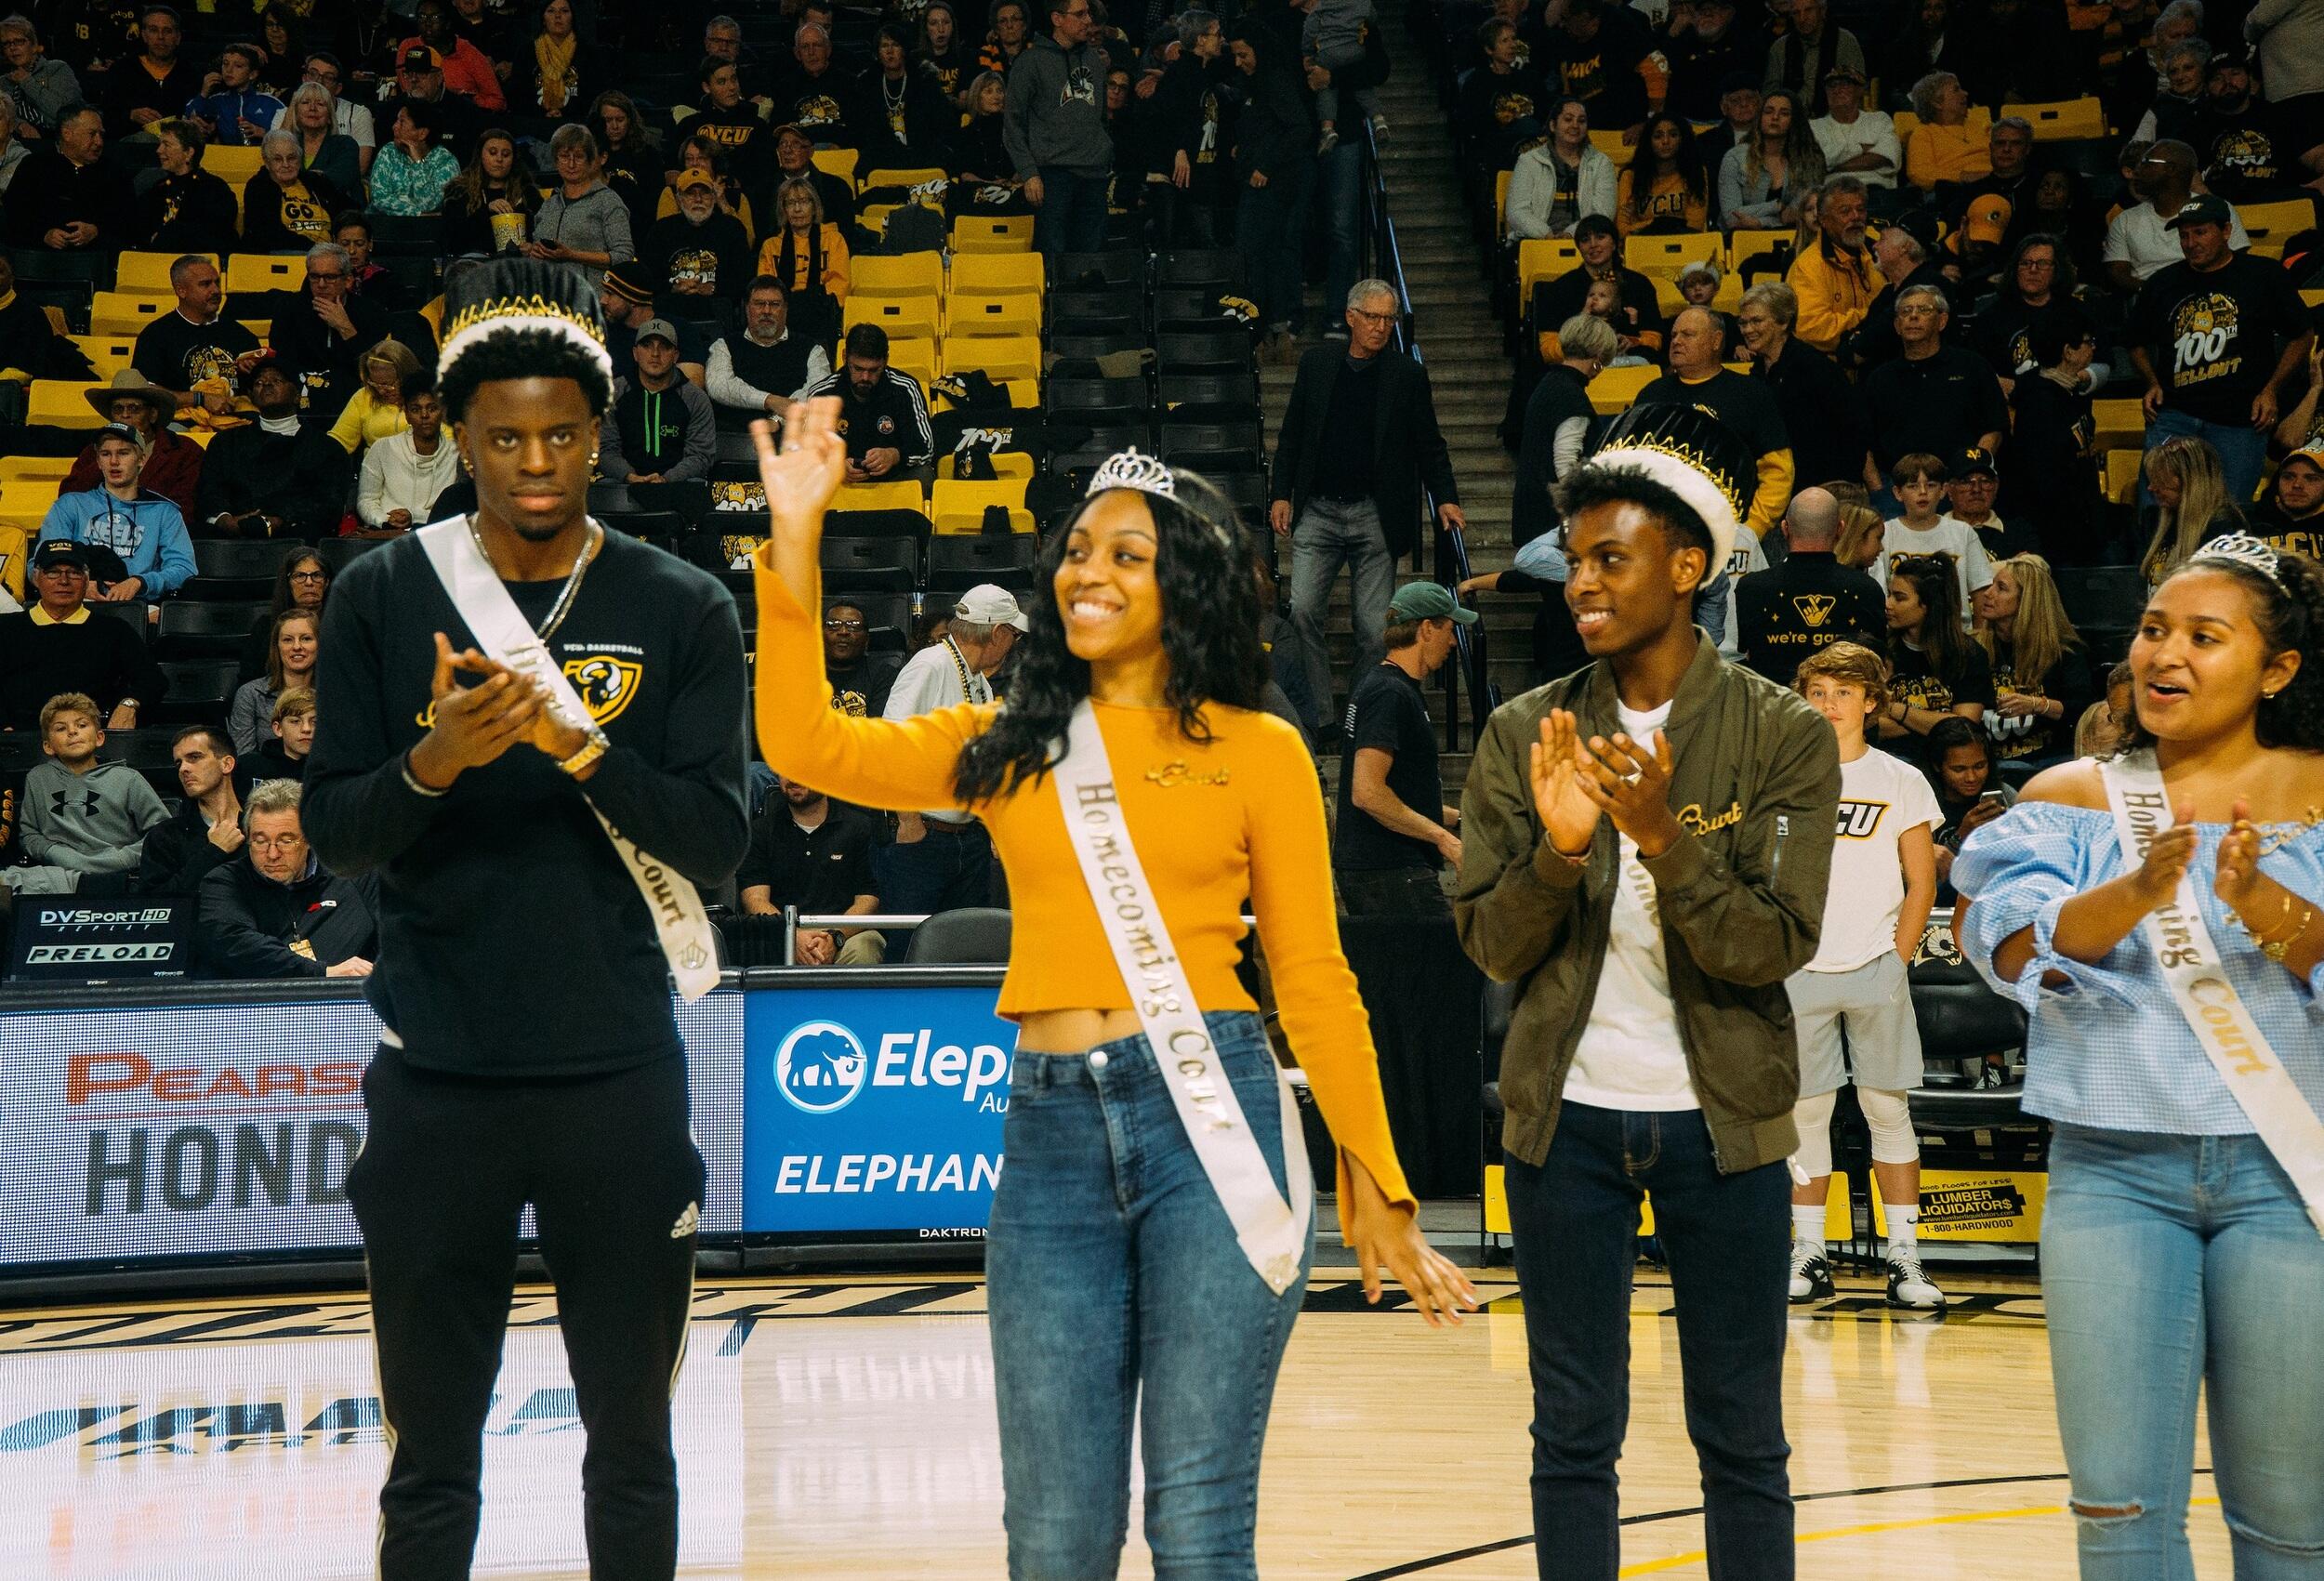 VCU will be a ‘Frameable’ celebration featuring several